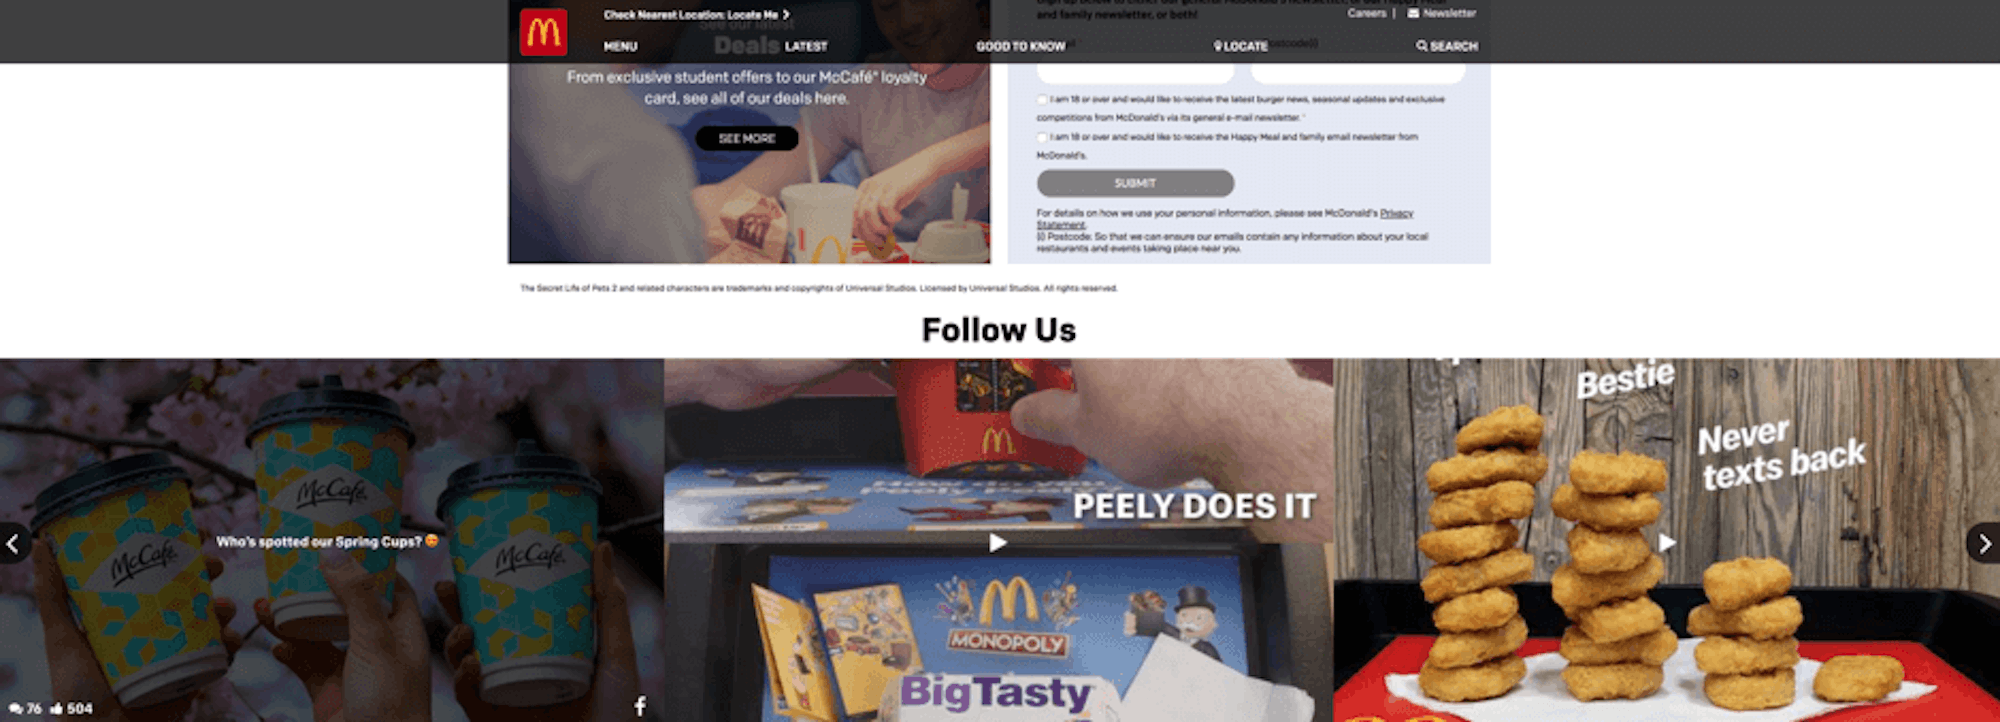 McDonald's home page. Also shows recent social media activity.